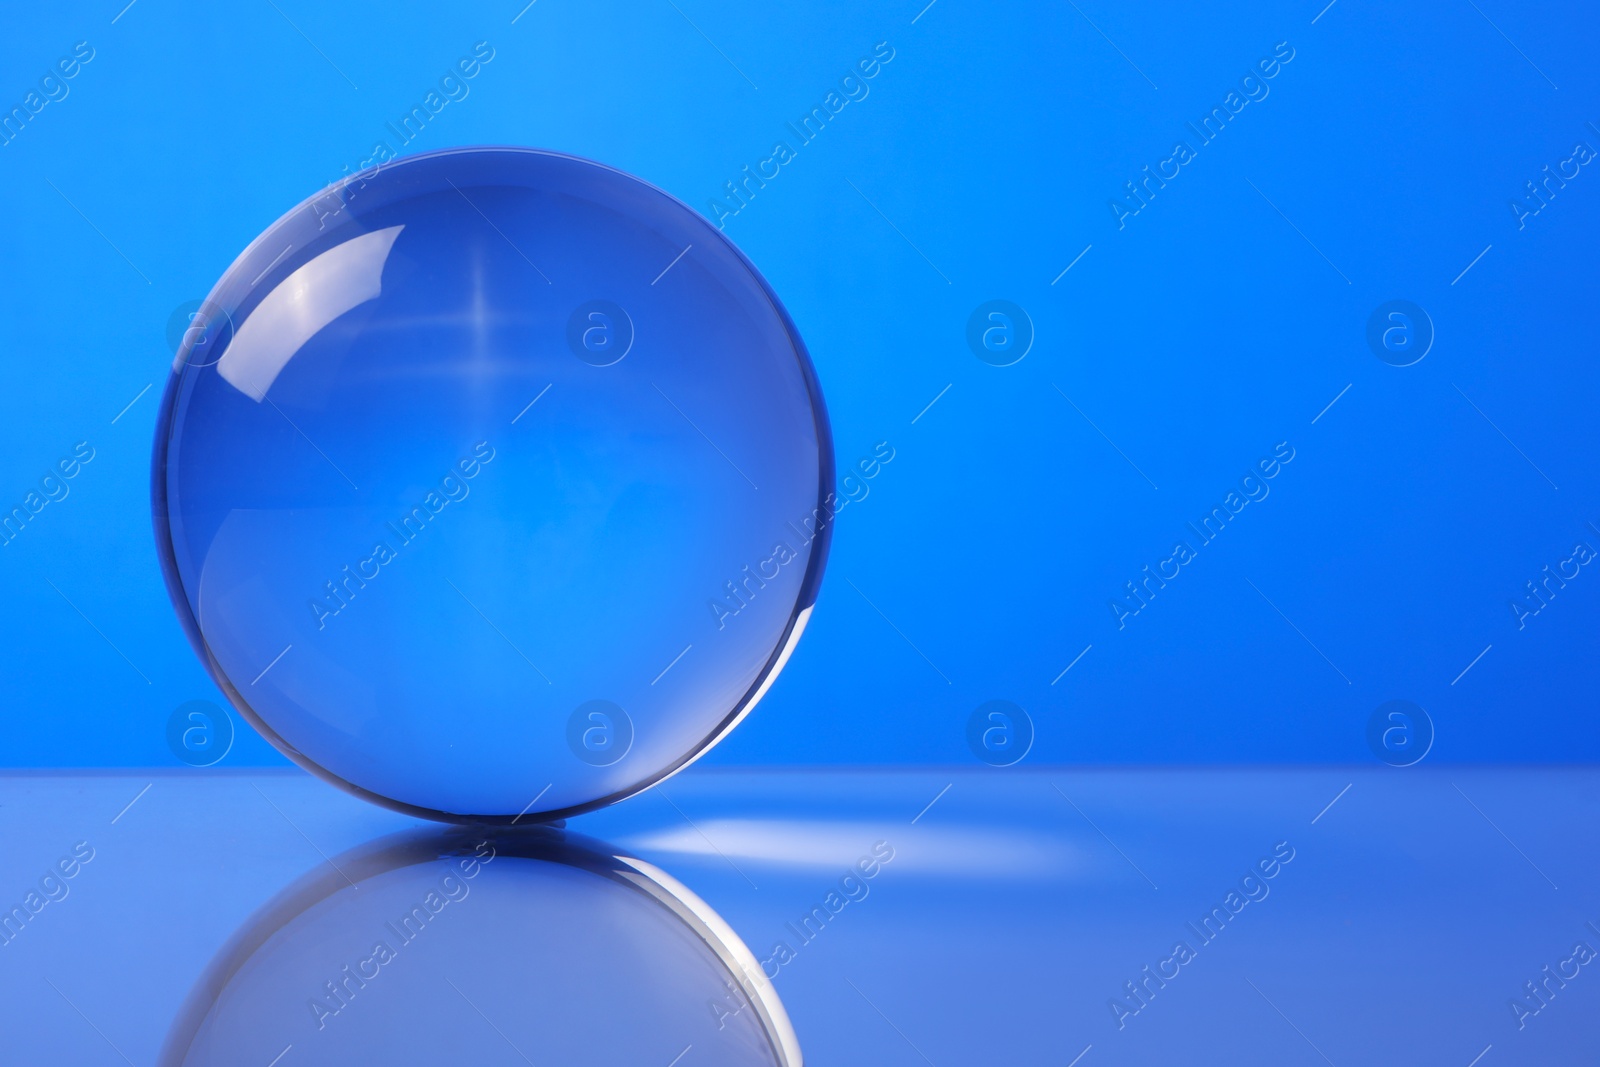 Photo of Transparent glass ball on mirror surface against blue background. Space for text